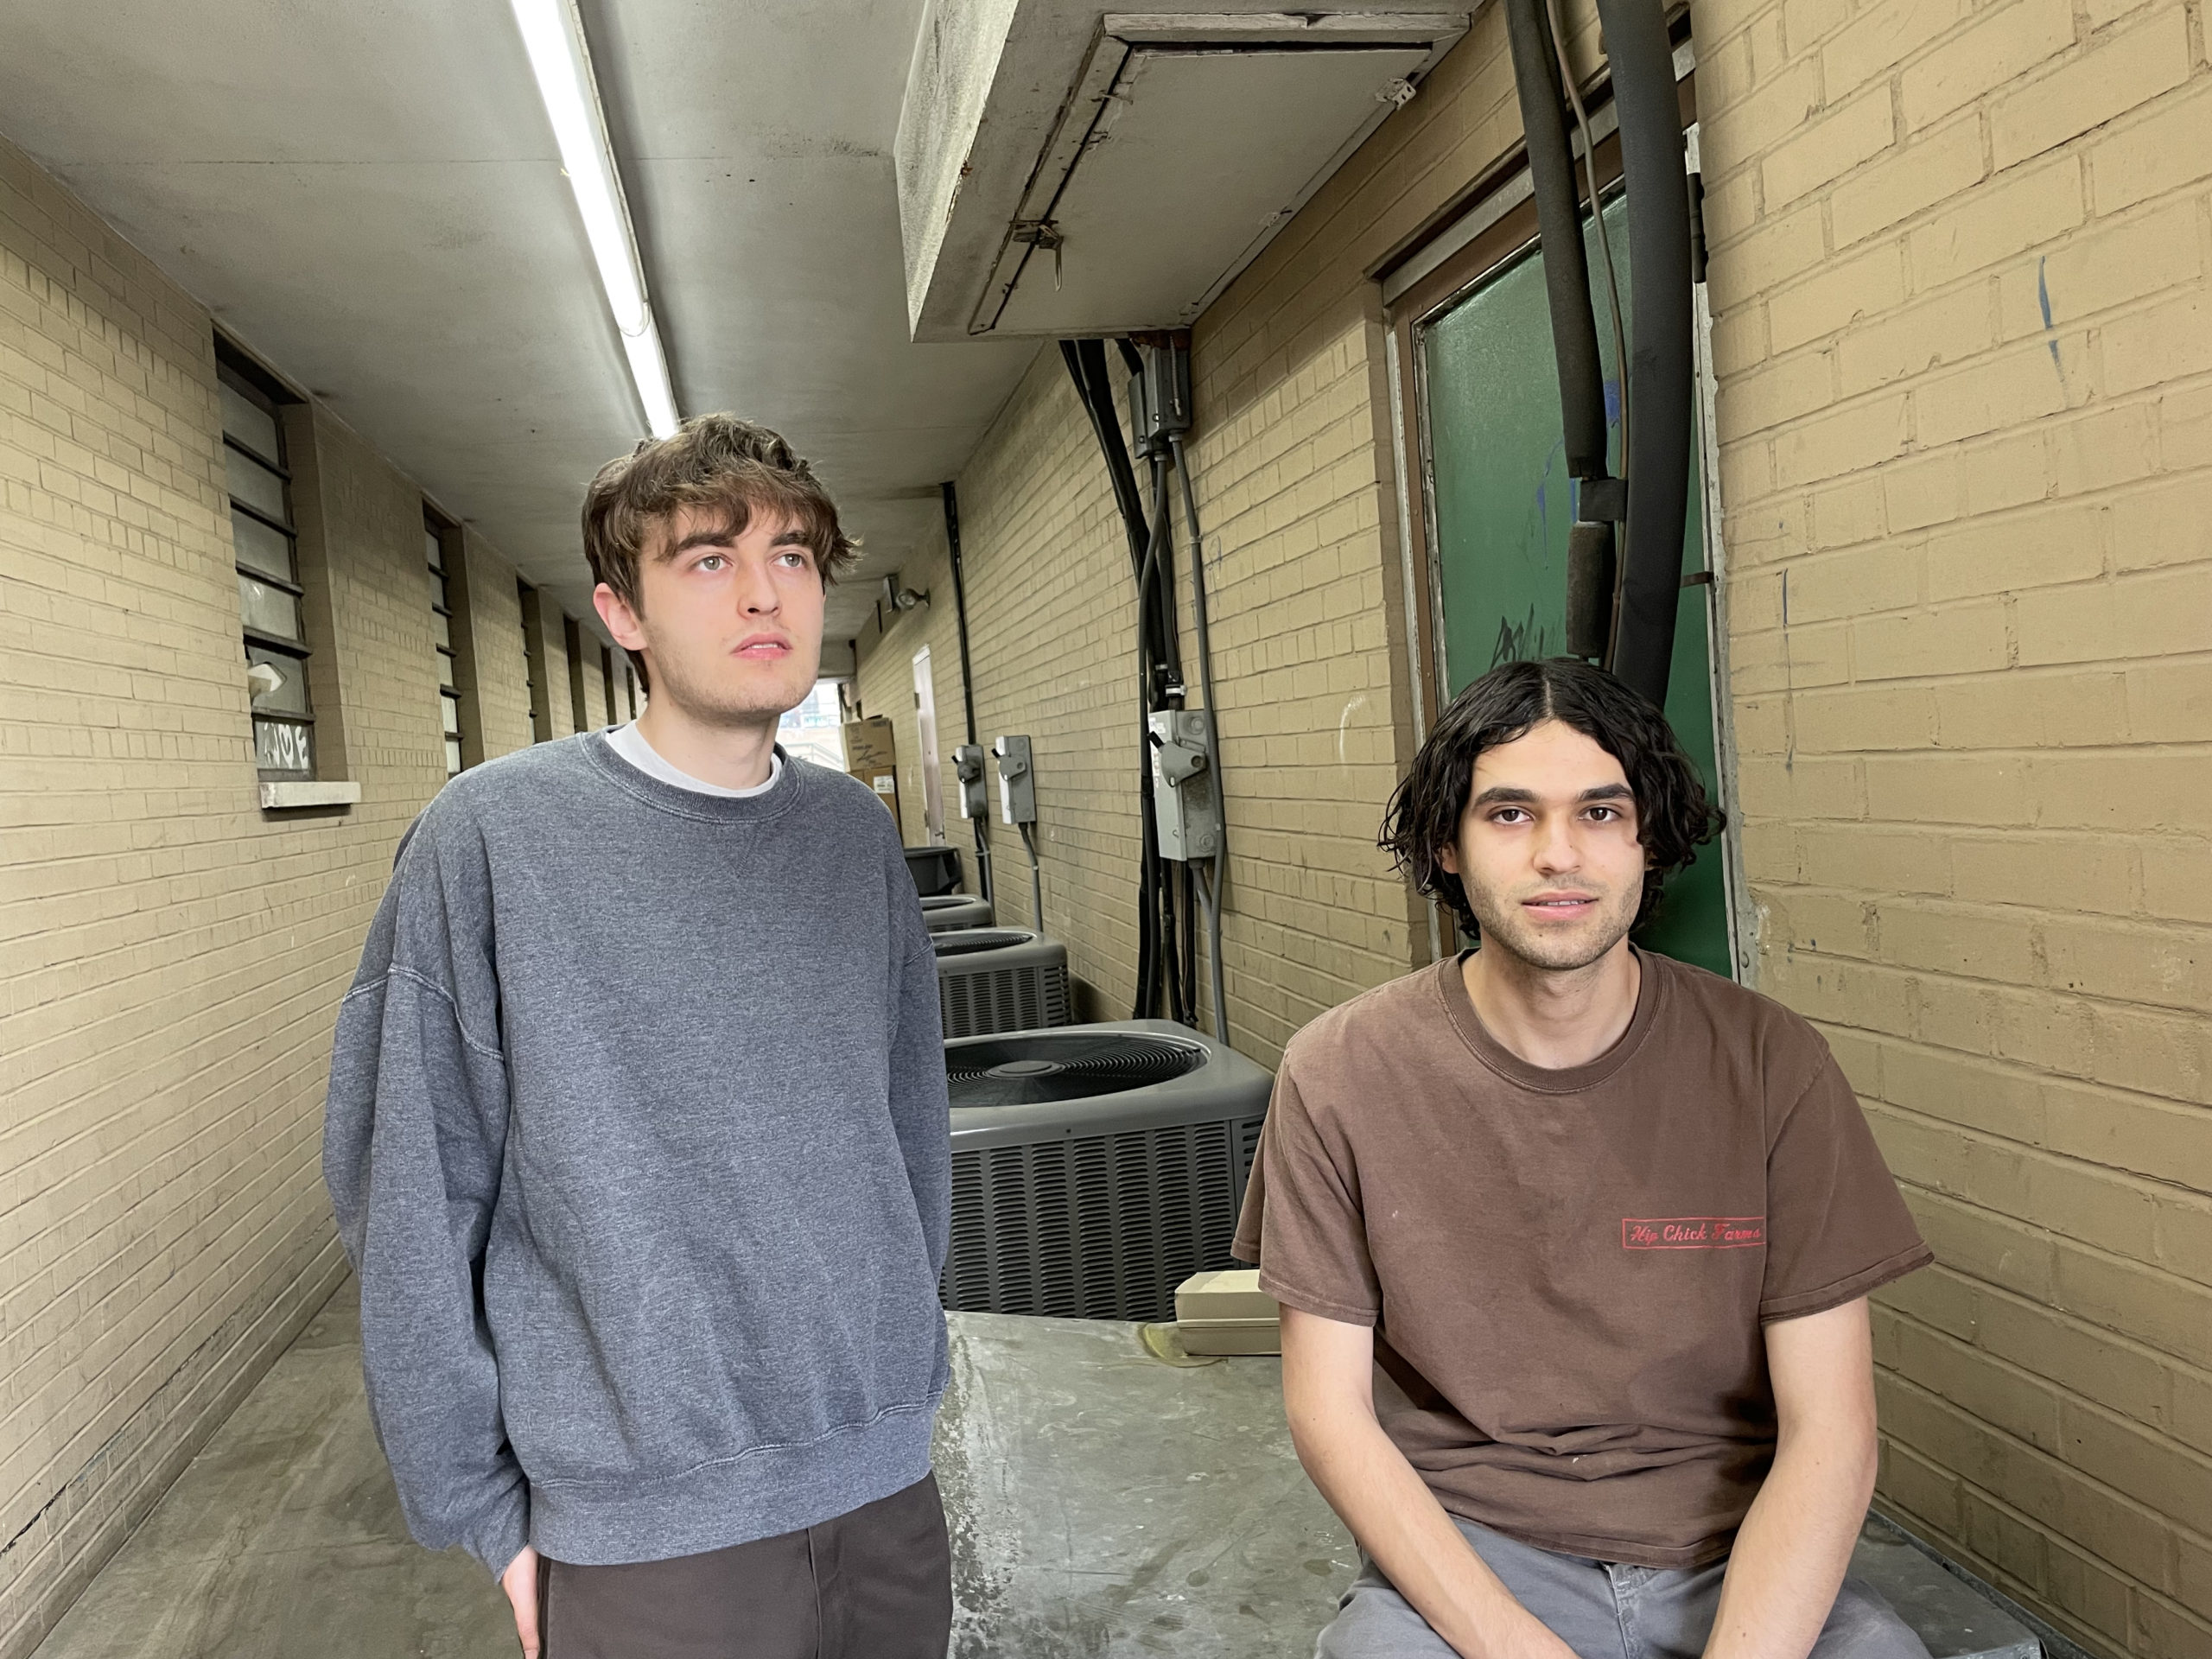 NJ slowcore duo Joyer shares new “Worst Thing” video; ‘Perfect Gray’ is due 9/24 via Julia’s War